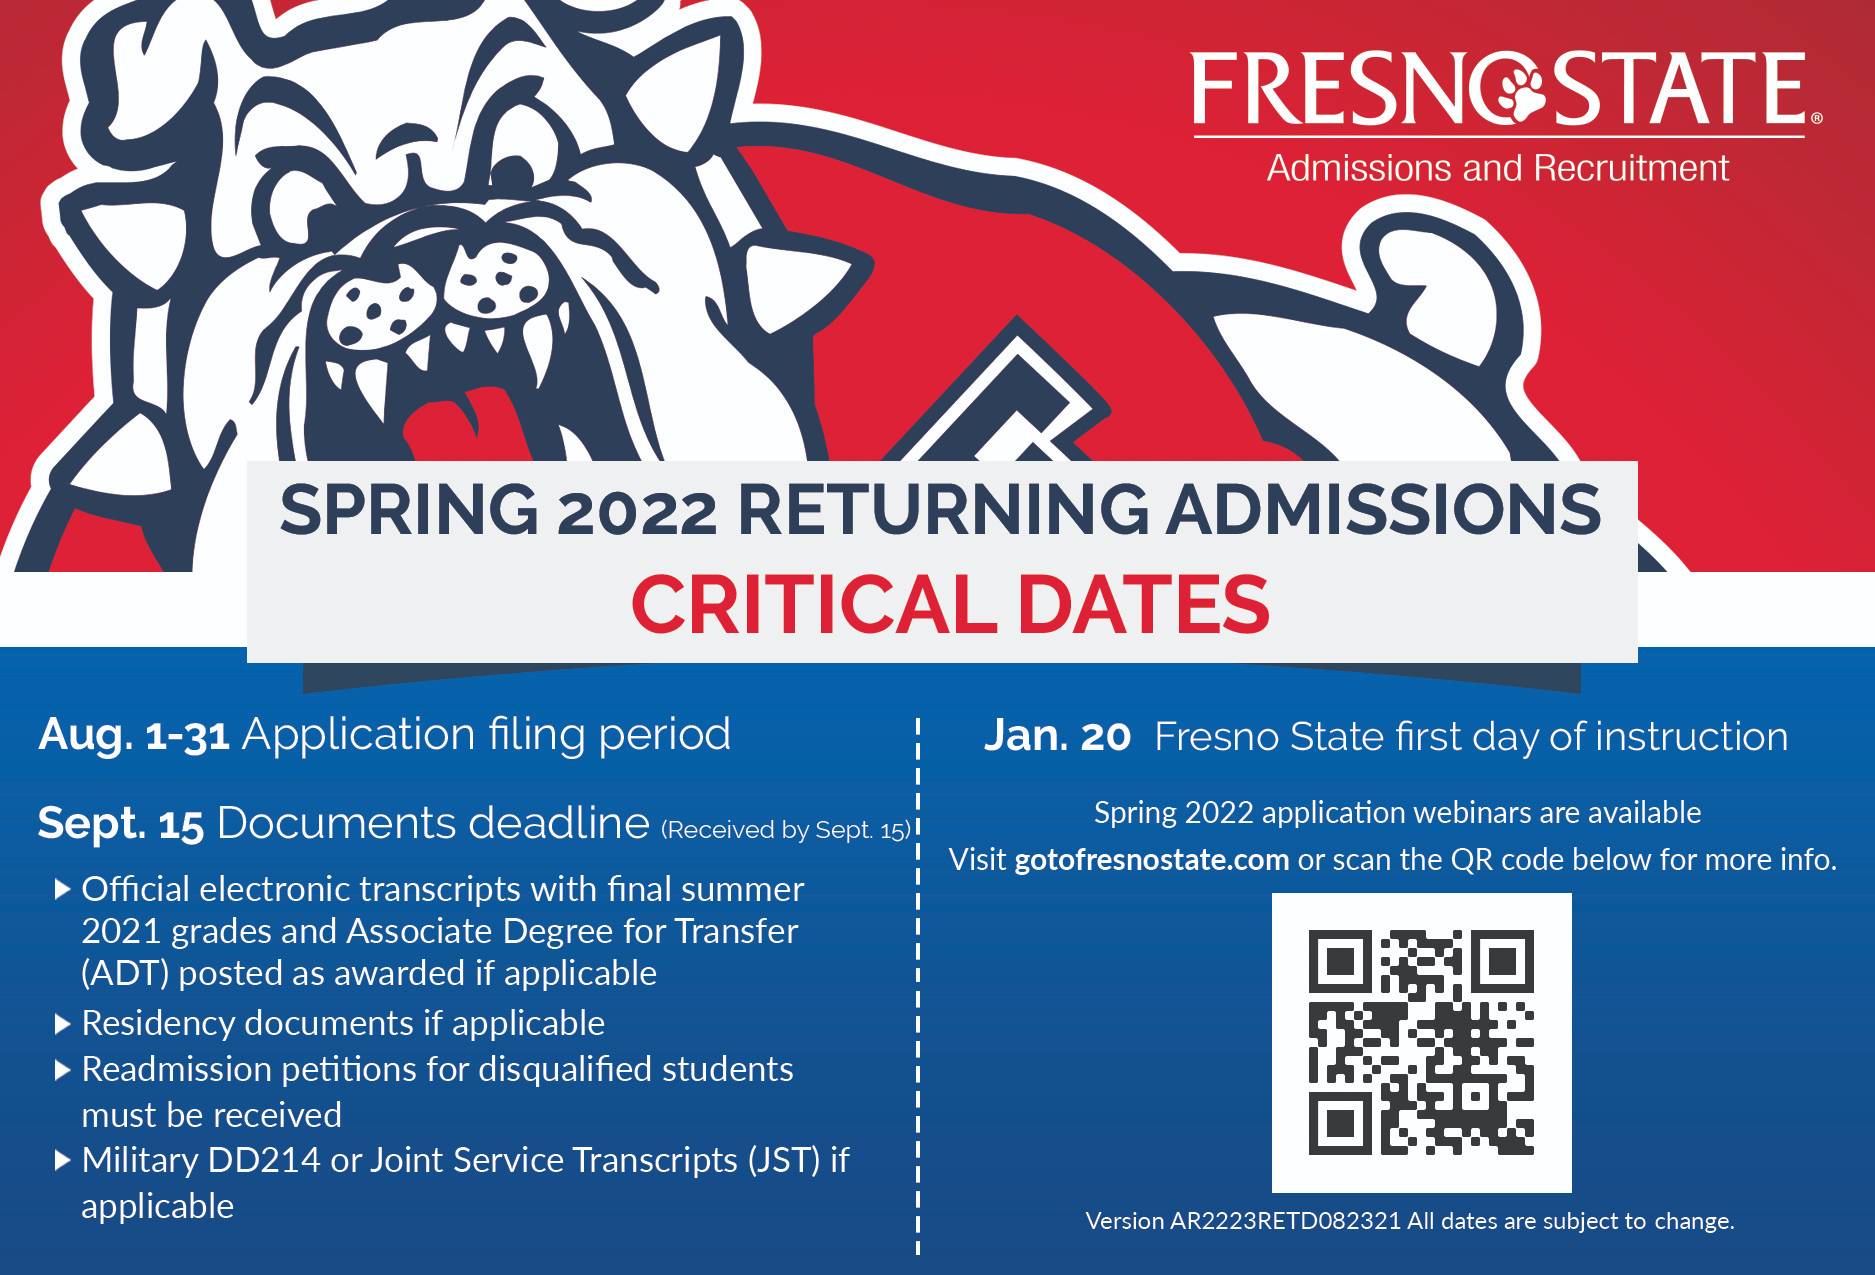 Fresno State Academic Calendar 2022 Returning - Admissions And Recruitment